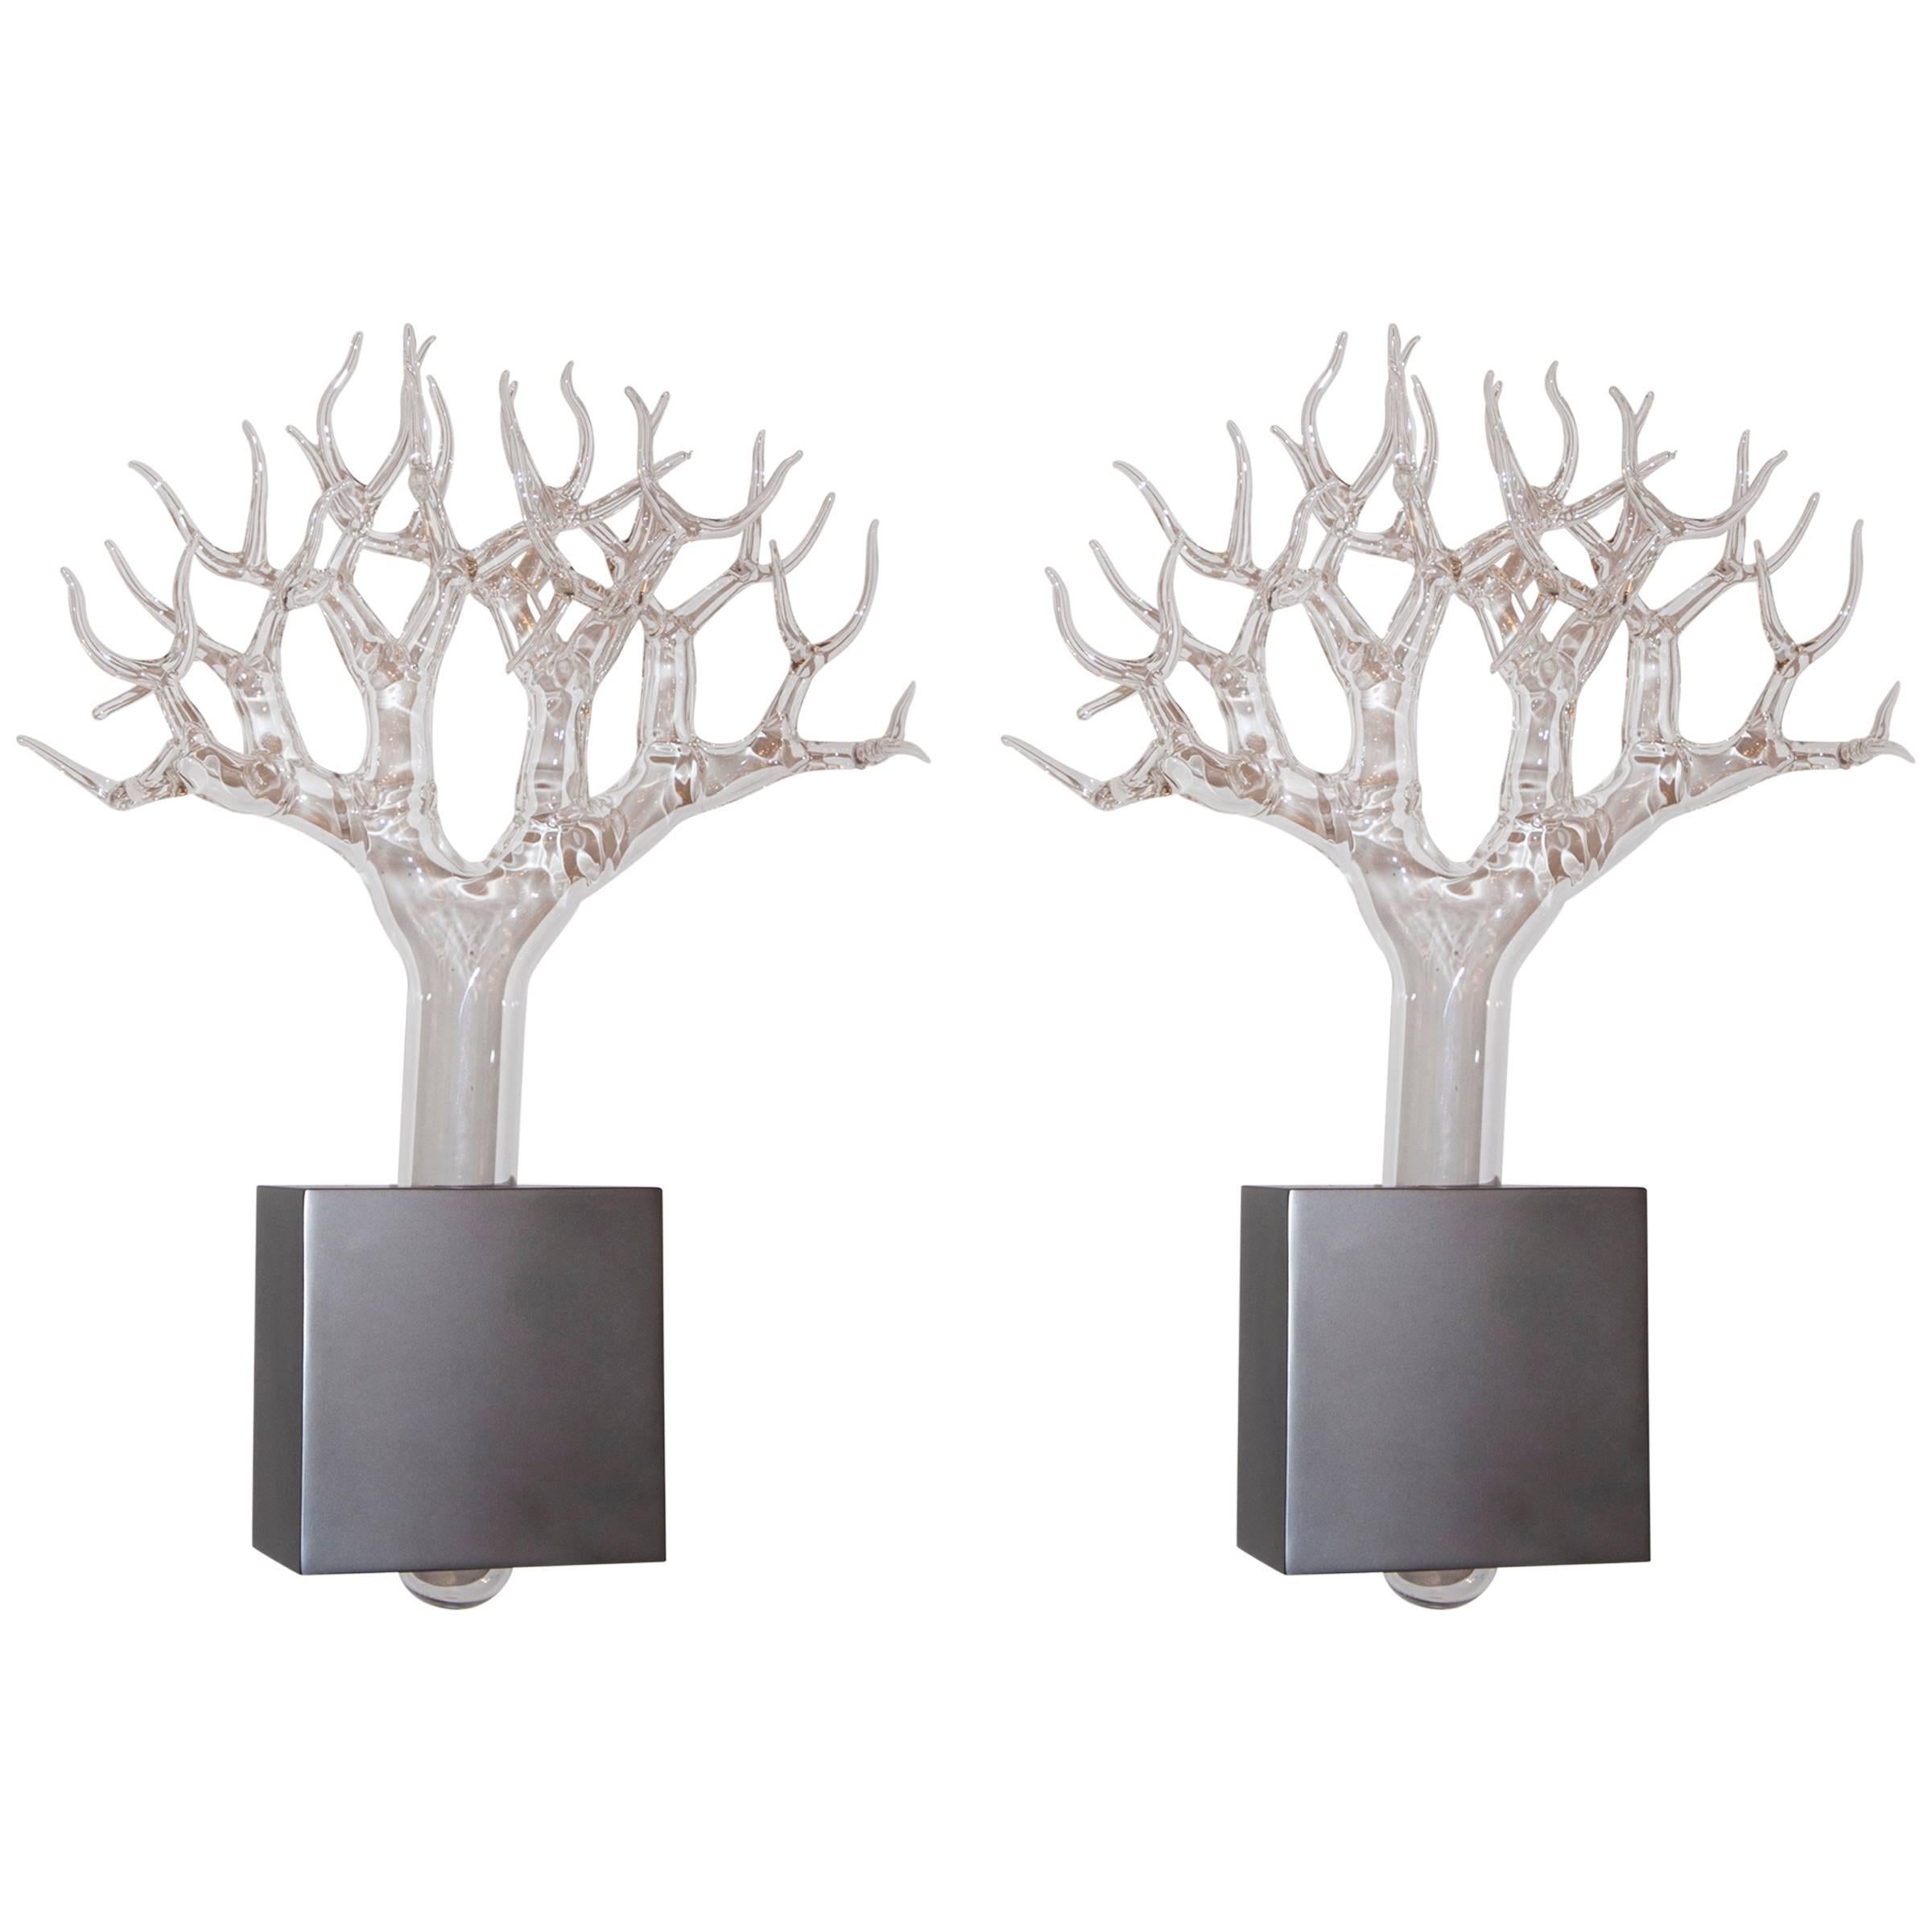 Pair of Sconces by Simone Crestani, Italy, 2013